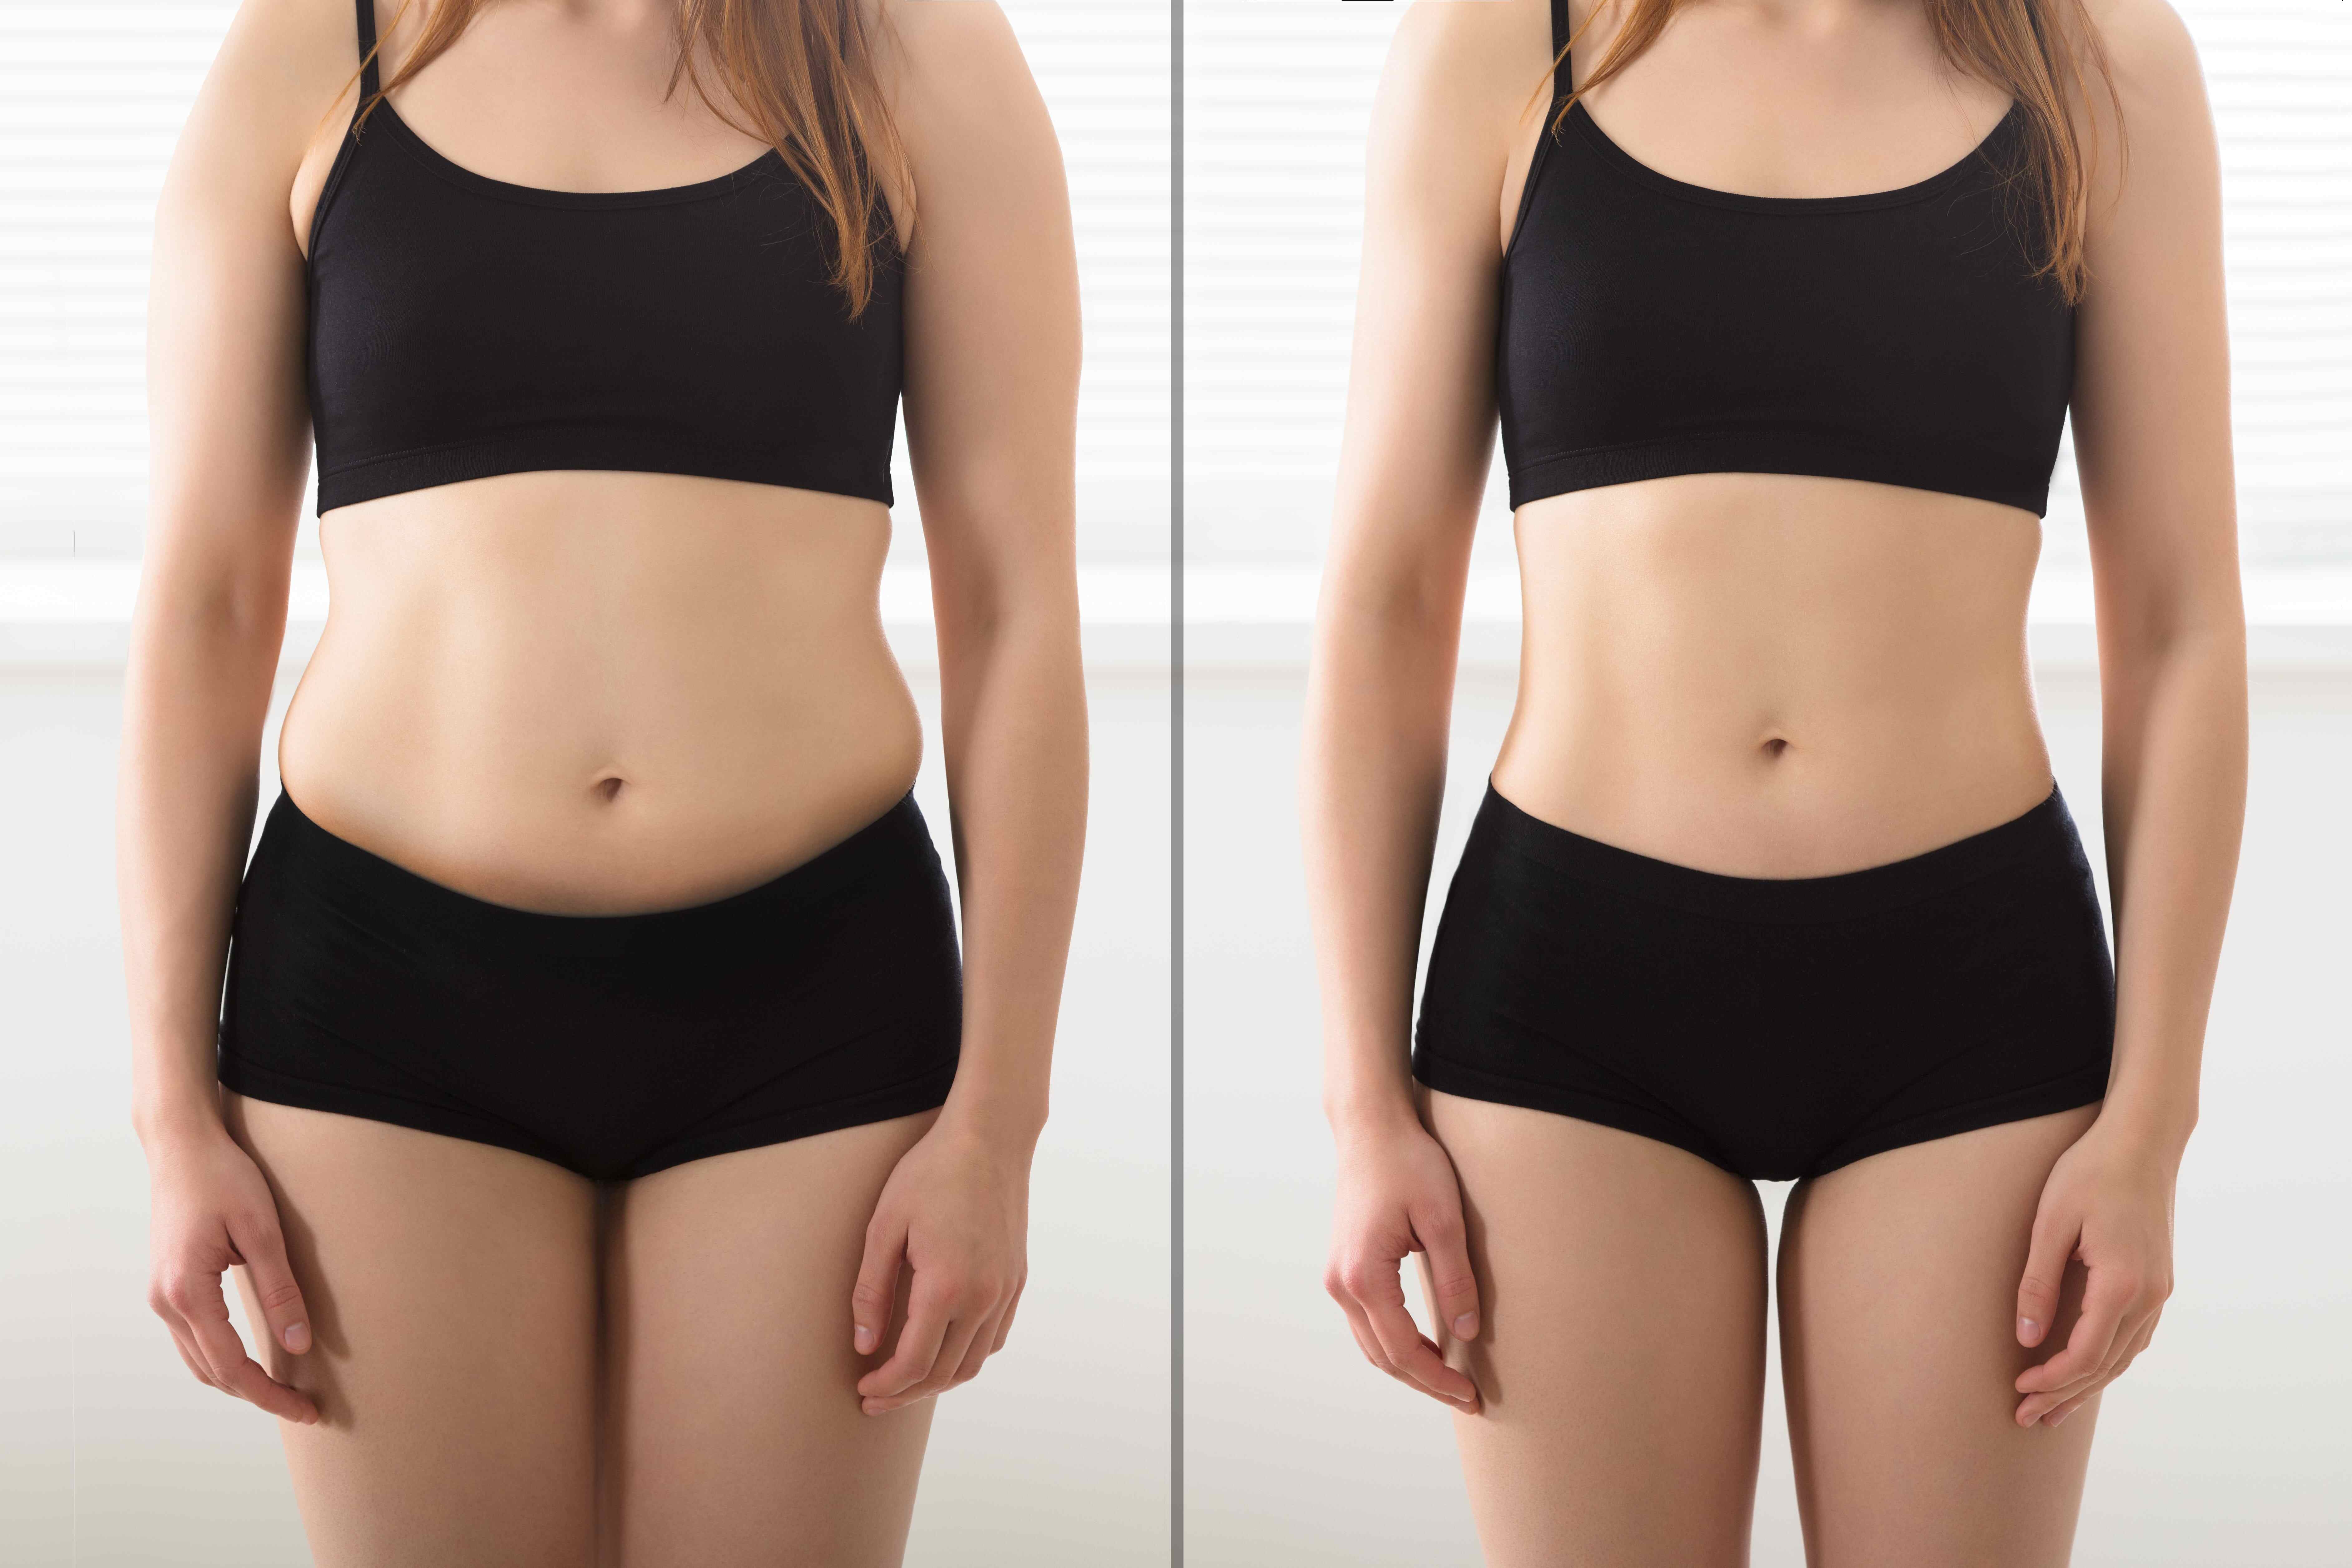 Liposuction Surgery Before and After - Transformative Aesthetic Results